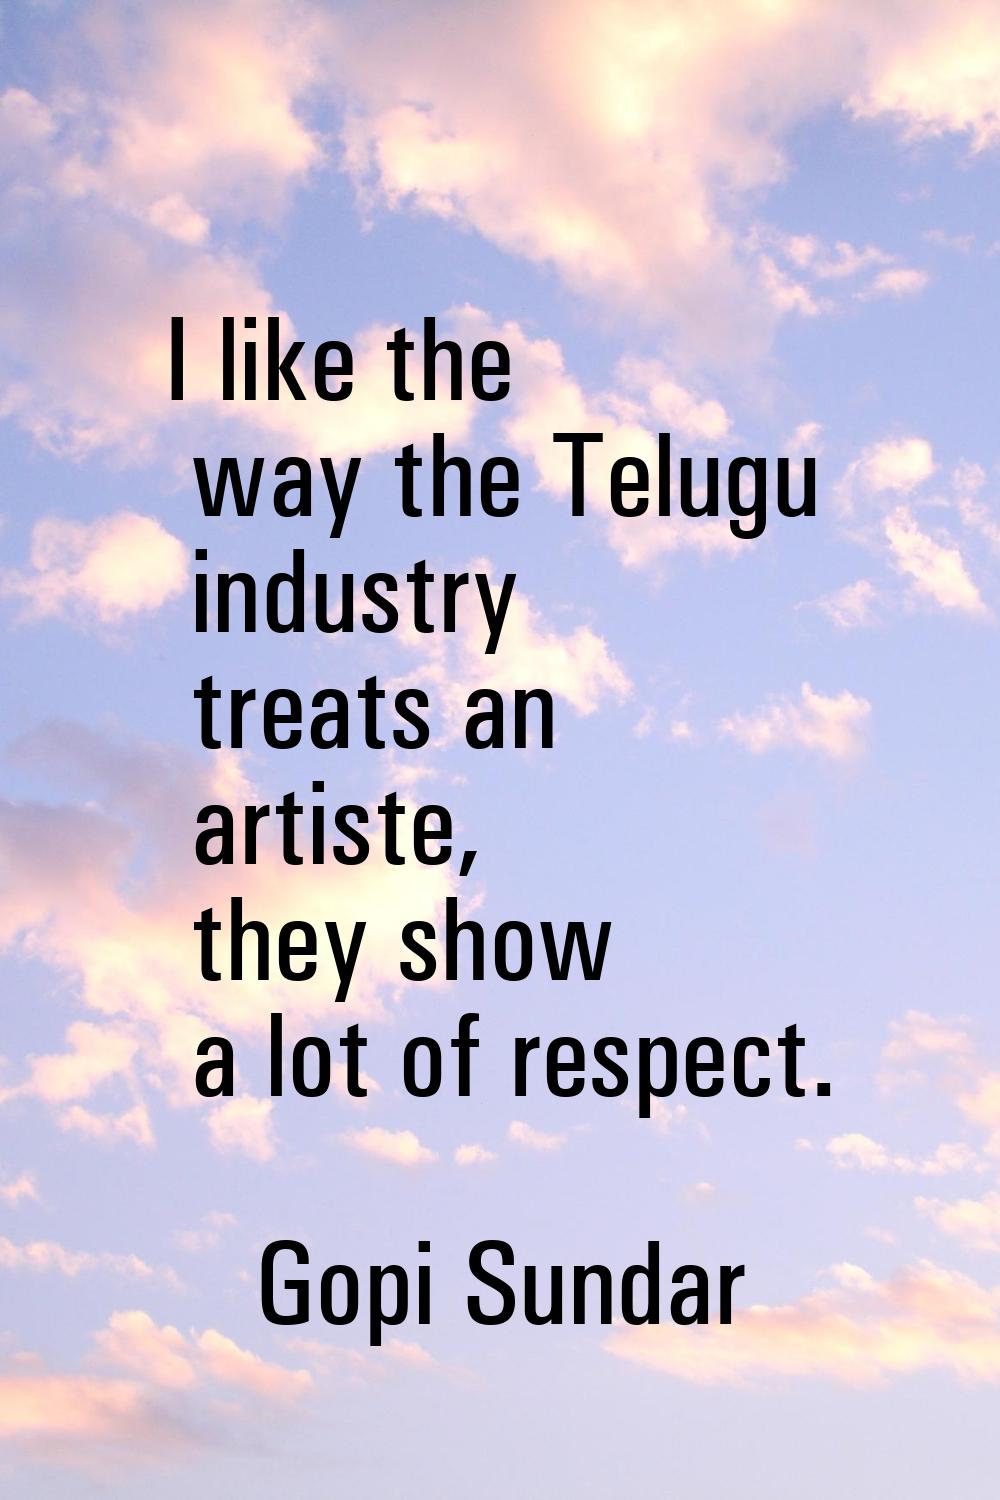 I like the way the Telugu industry treats an artiste, they show a lot of respect.